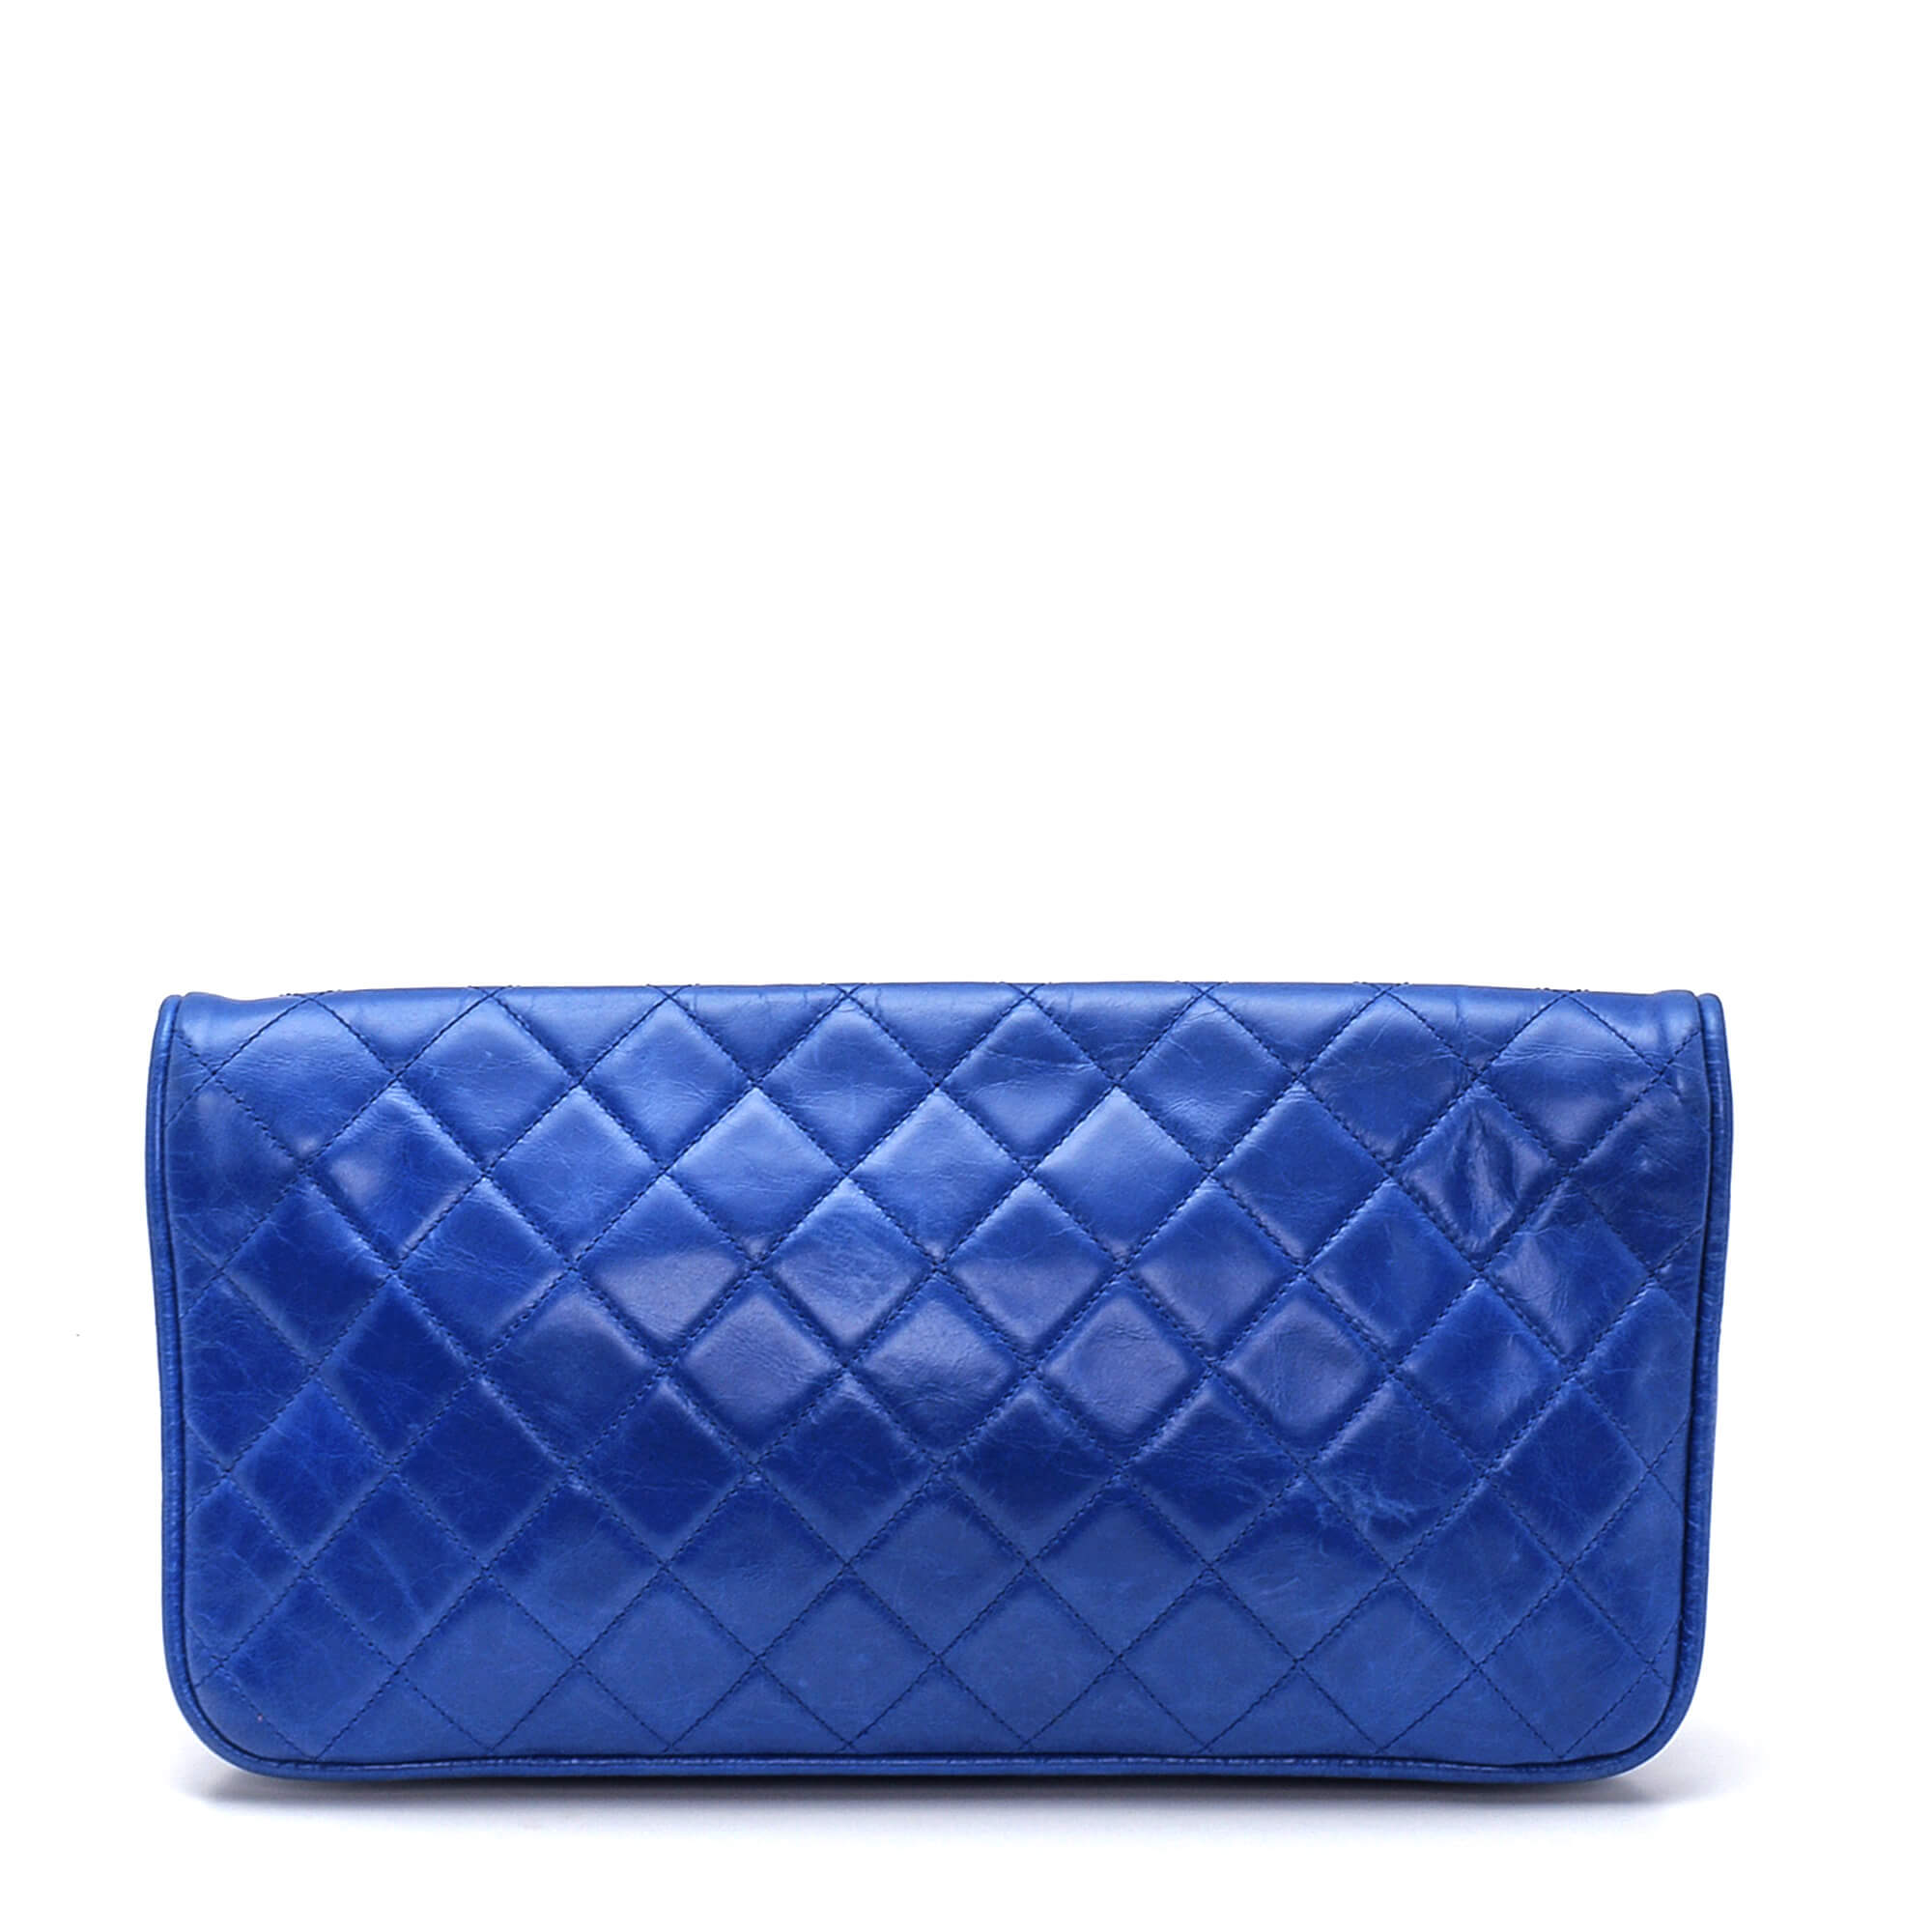 Chanel - Royal Blue Quilted Chain Clutch